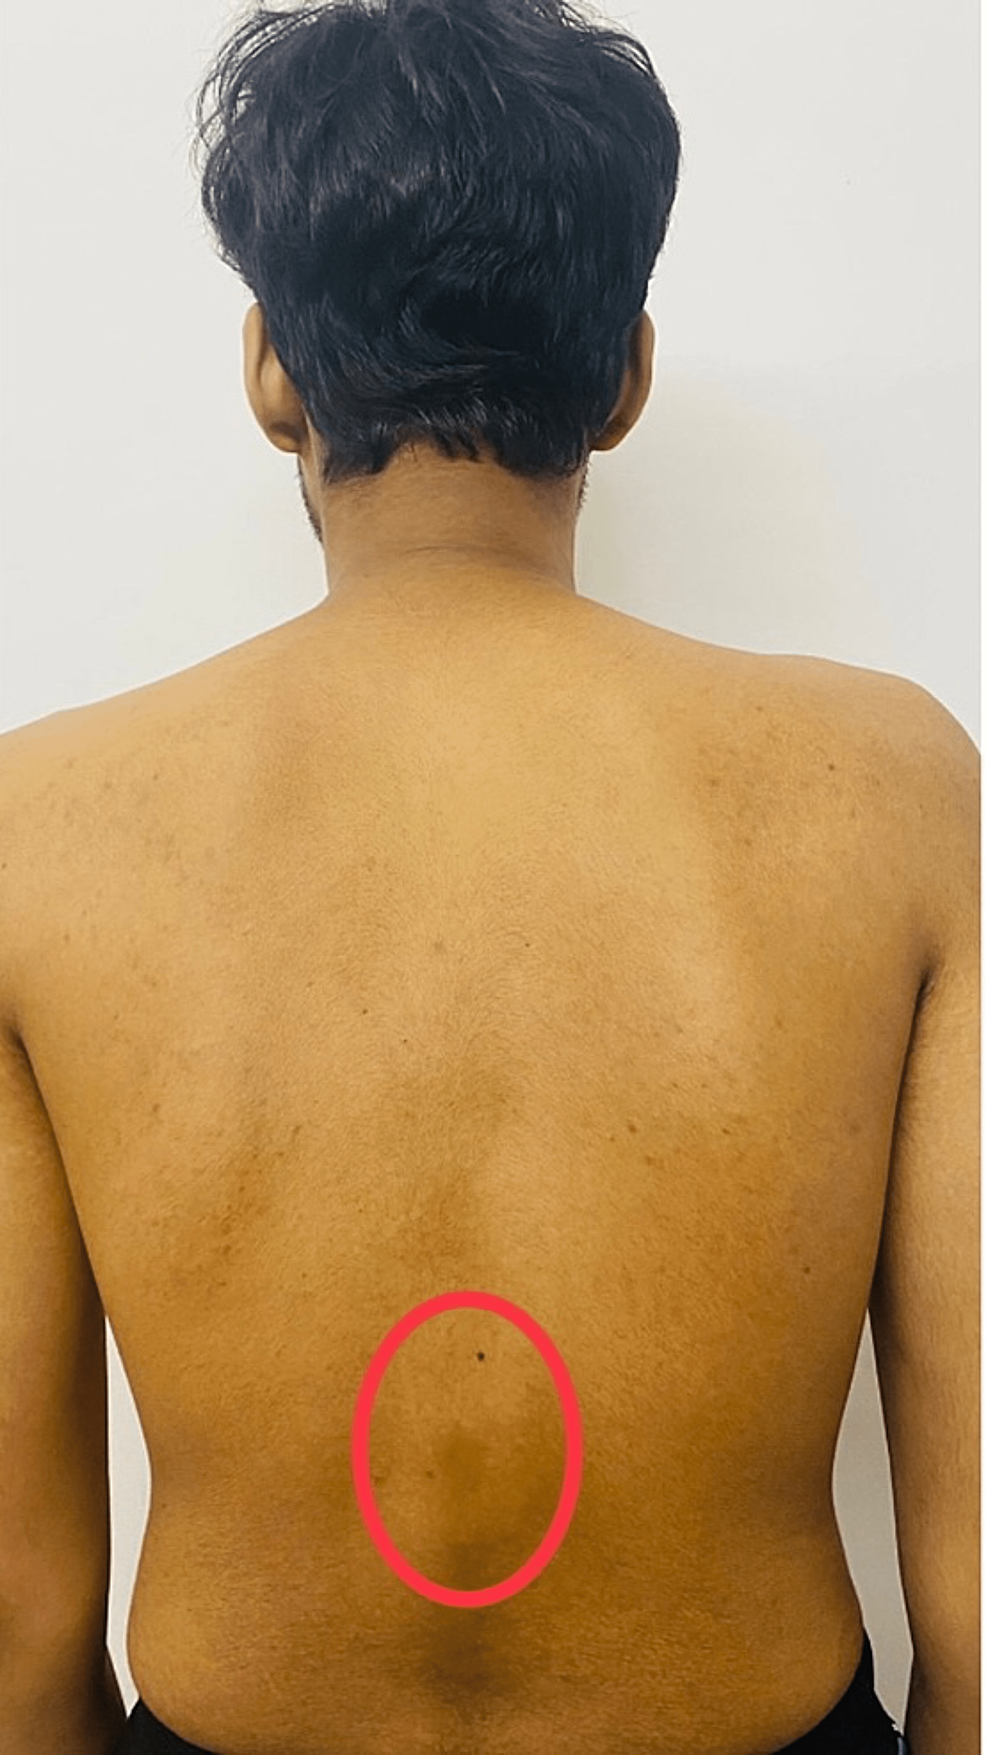 The-image-showcases-the-kyphotic-deformity-in-the-back